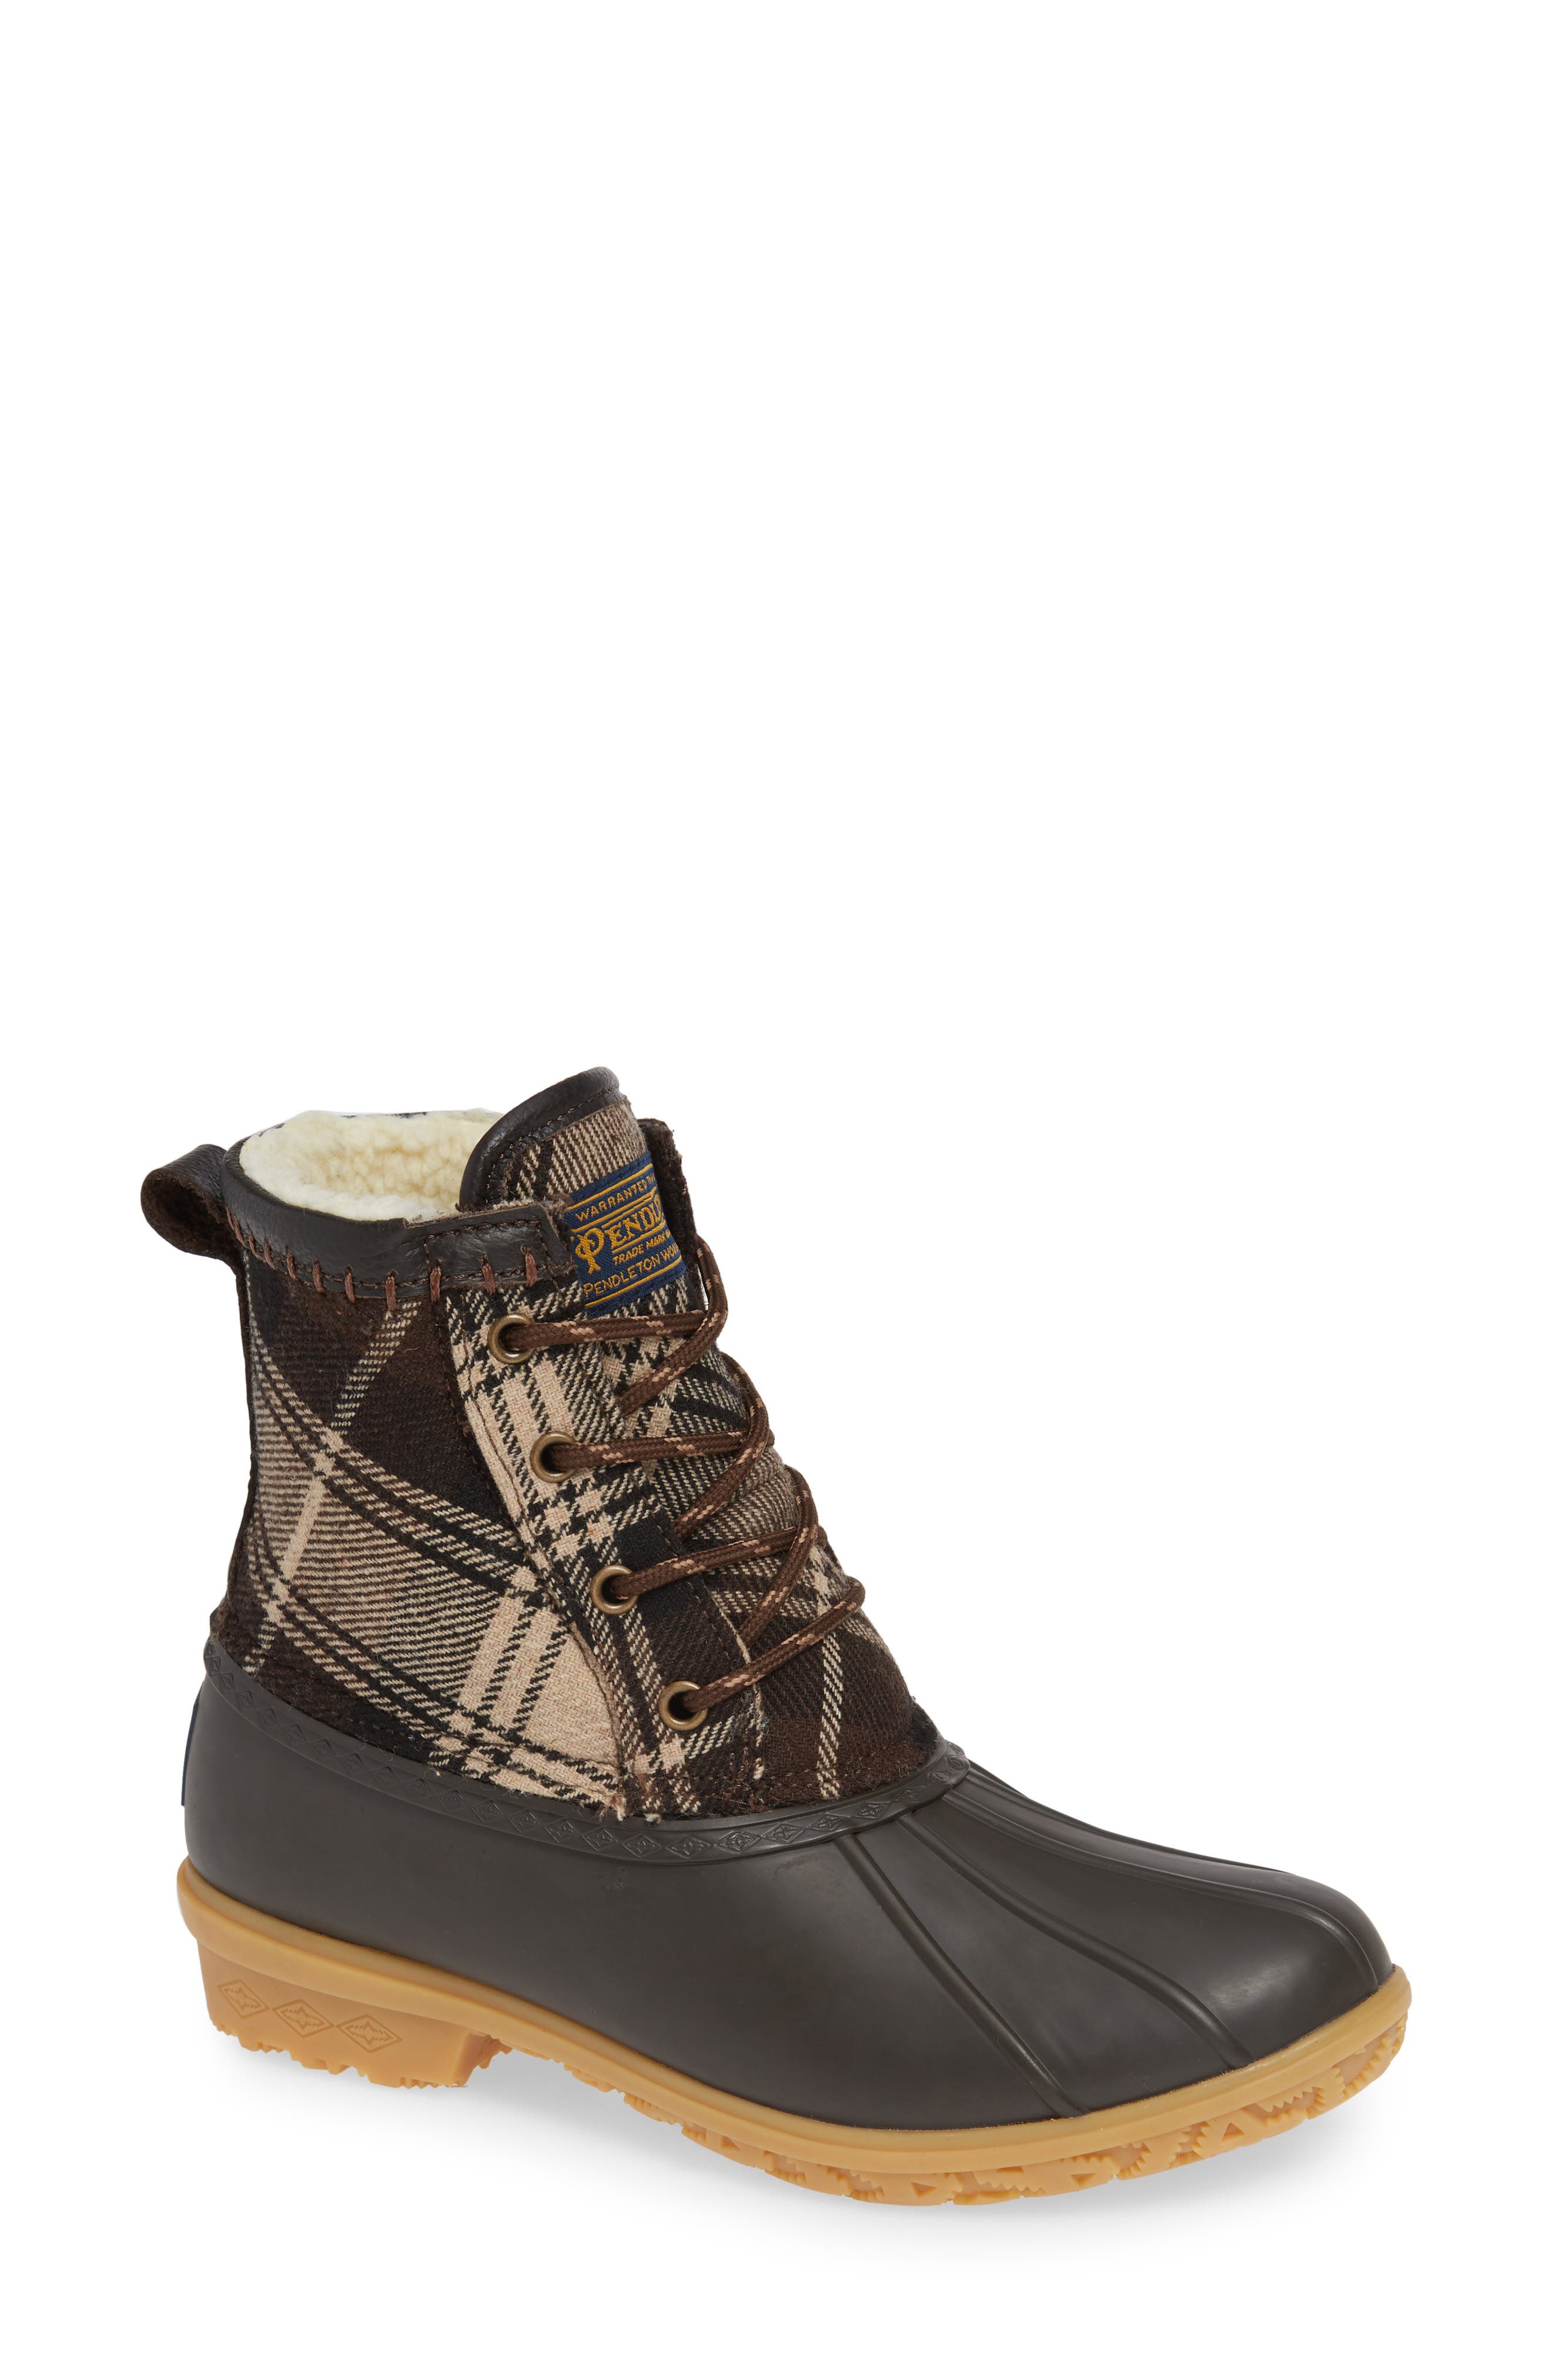 plaid duck boots